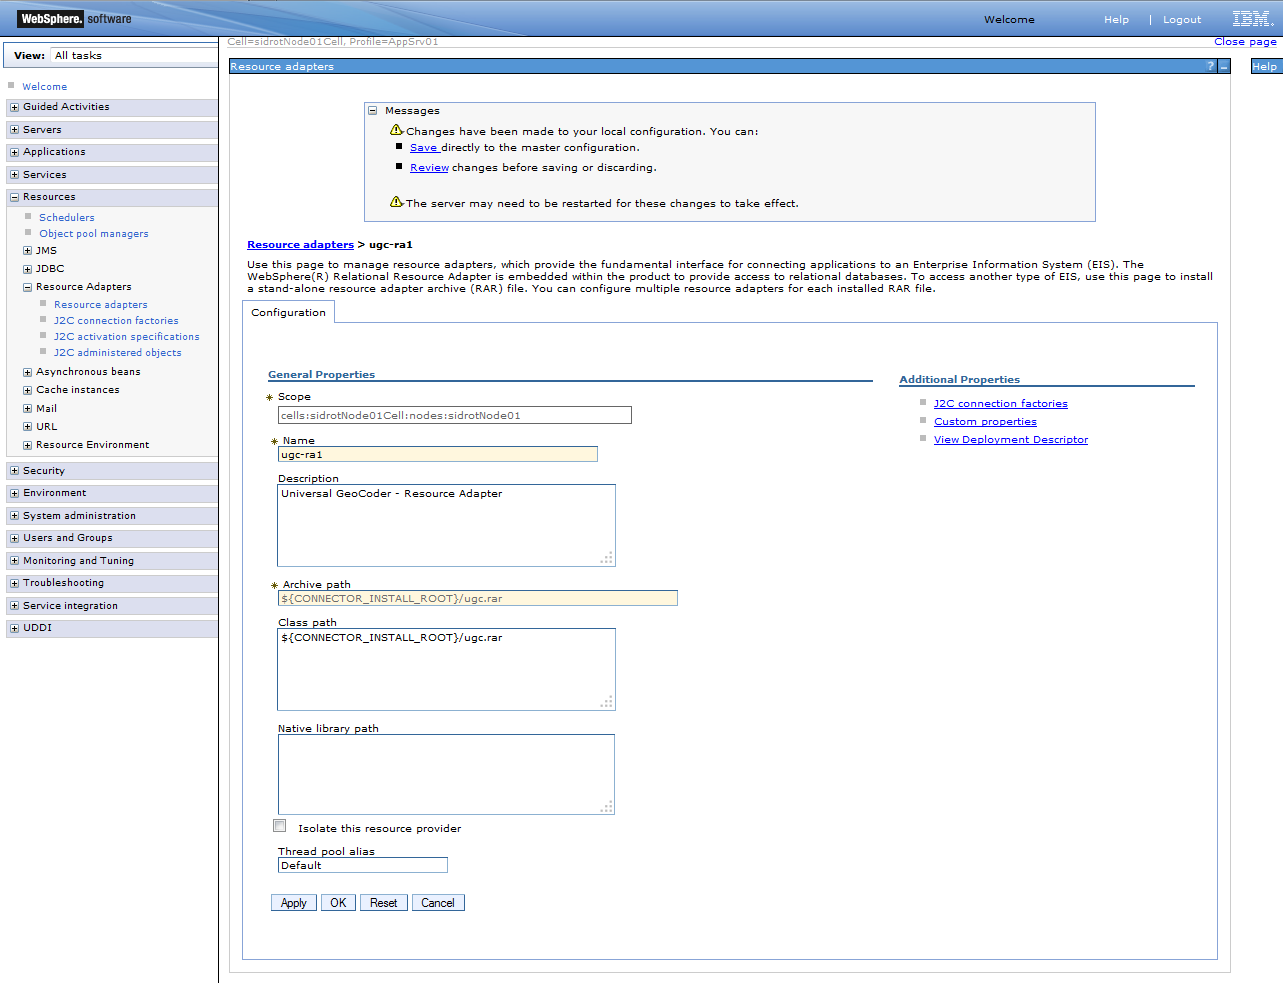 gcweb-reference-img/guides-installation/ugc-websphere-adaptateur-deploye.png